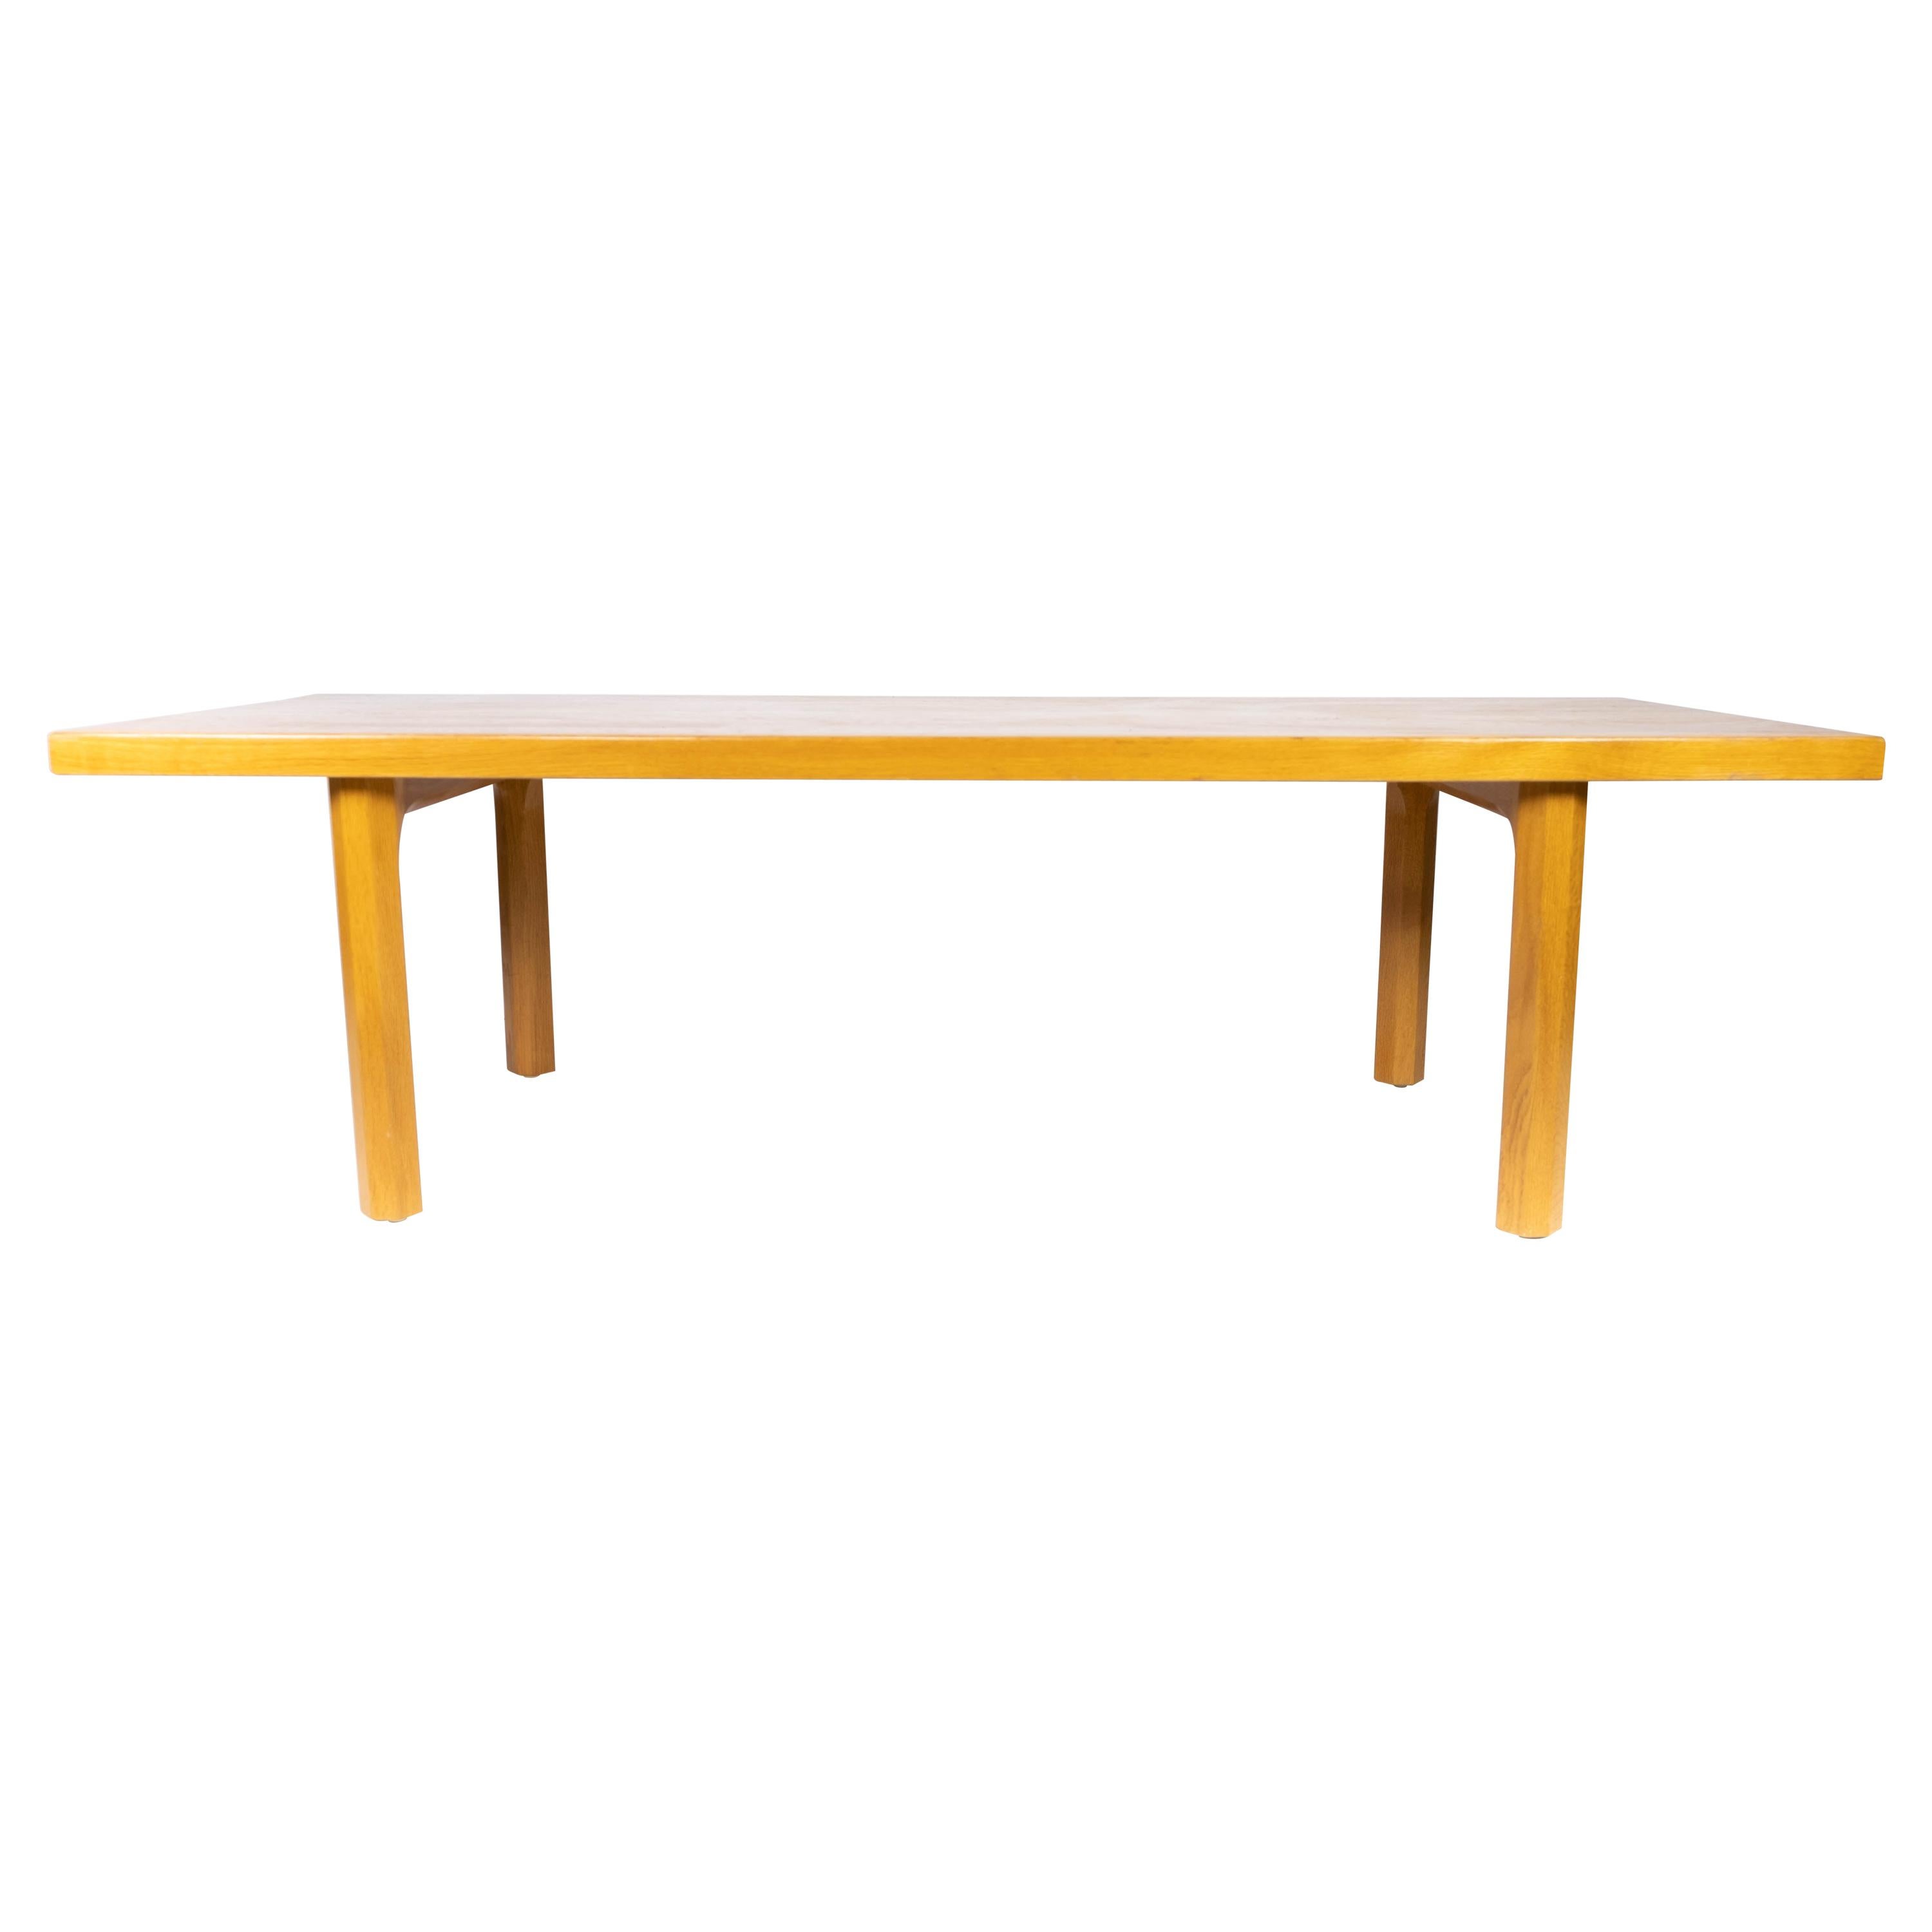 Coffee Table Made In Oak, Danish Design From 1960s For Sale